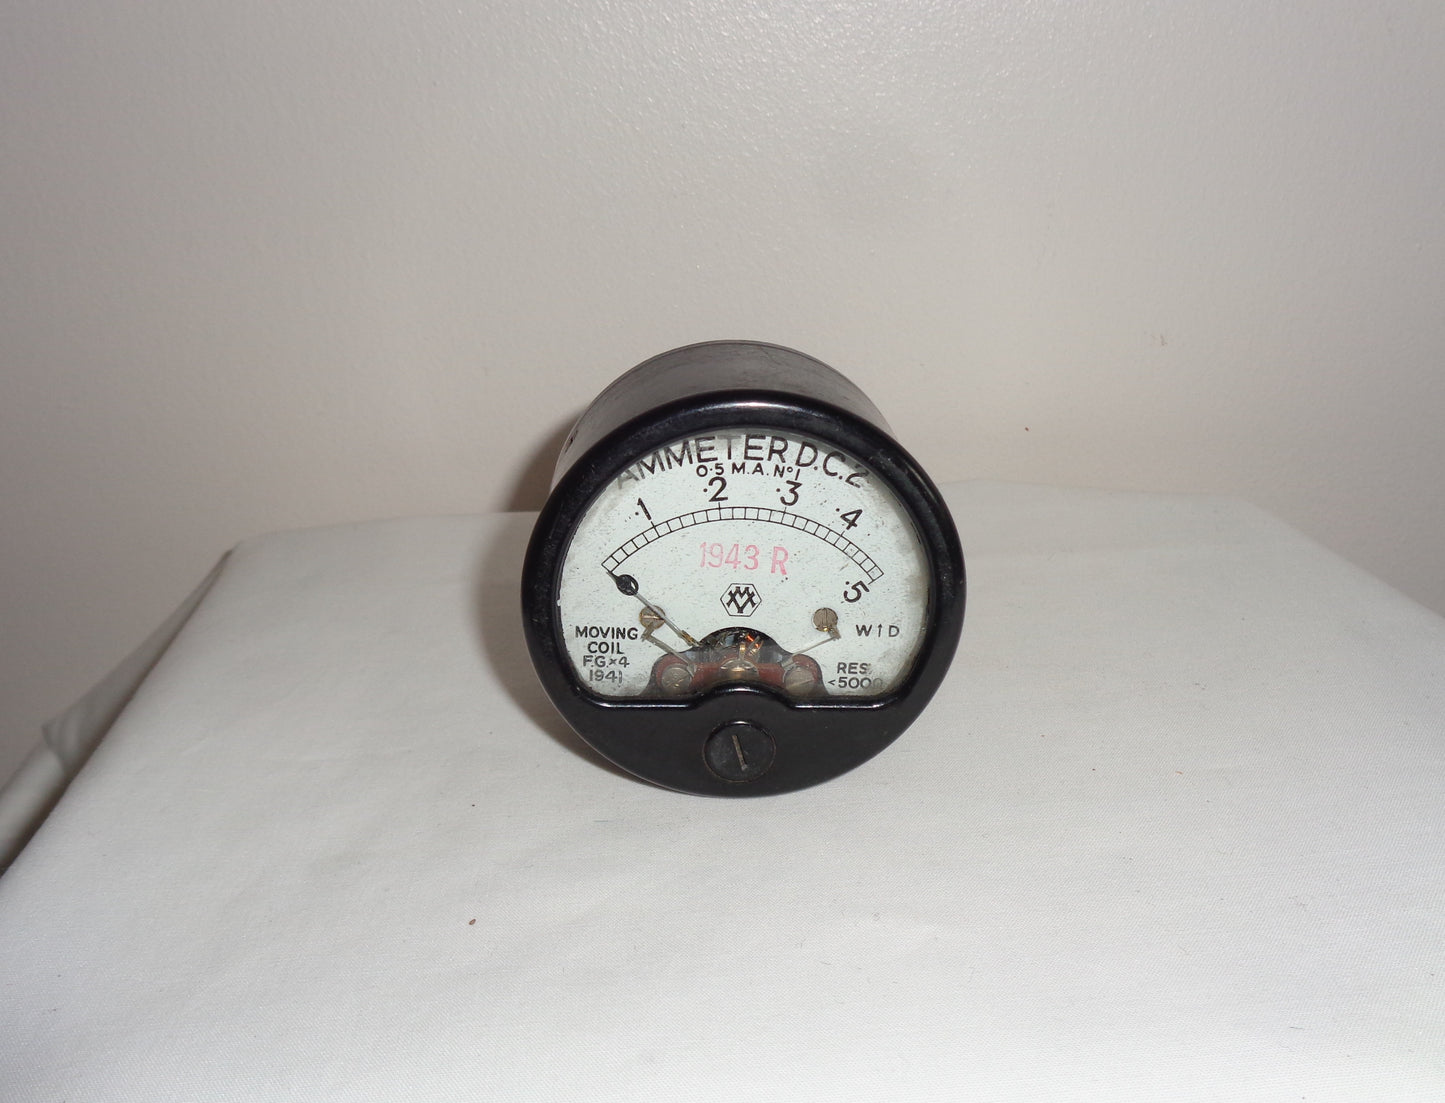 1943 WW2 War Department Moving Coil 0.5 Milliamp Ammeter For Wireless Set 22 WS22